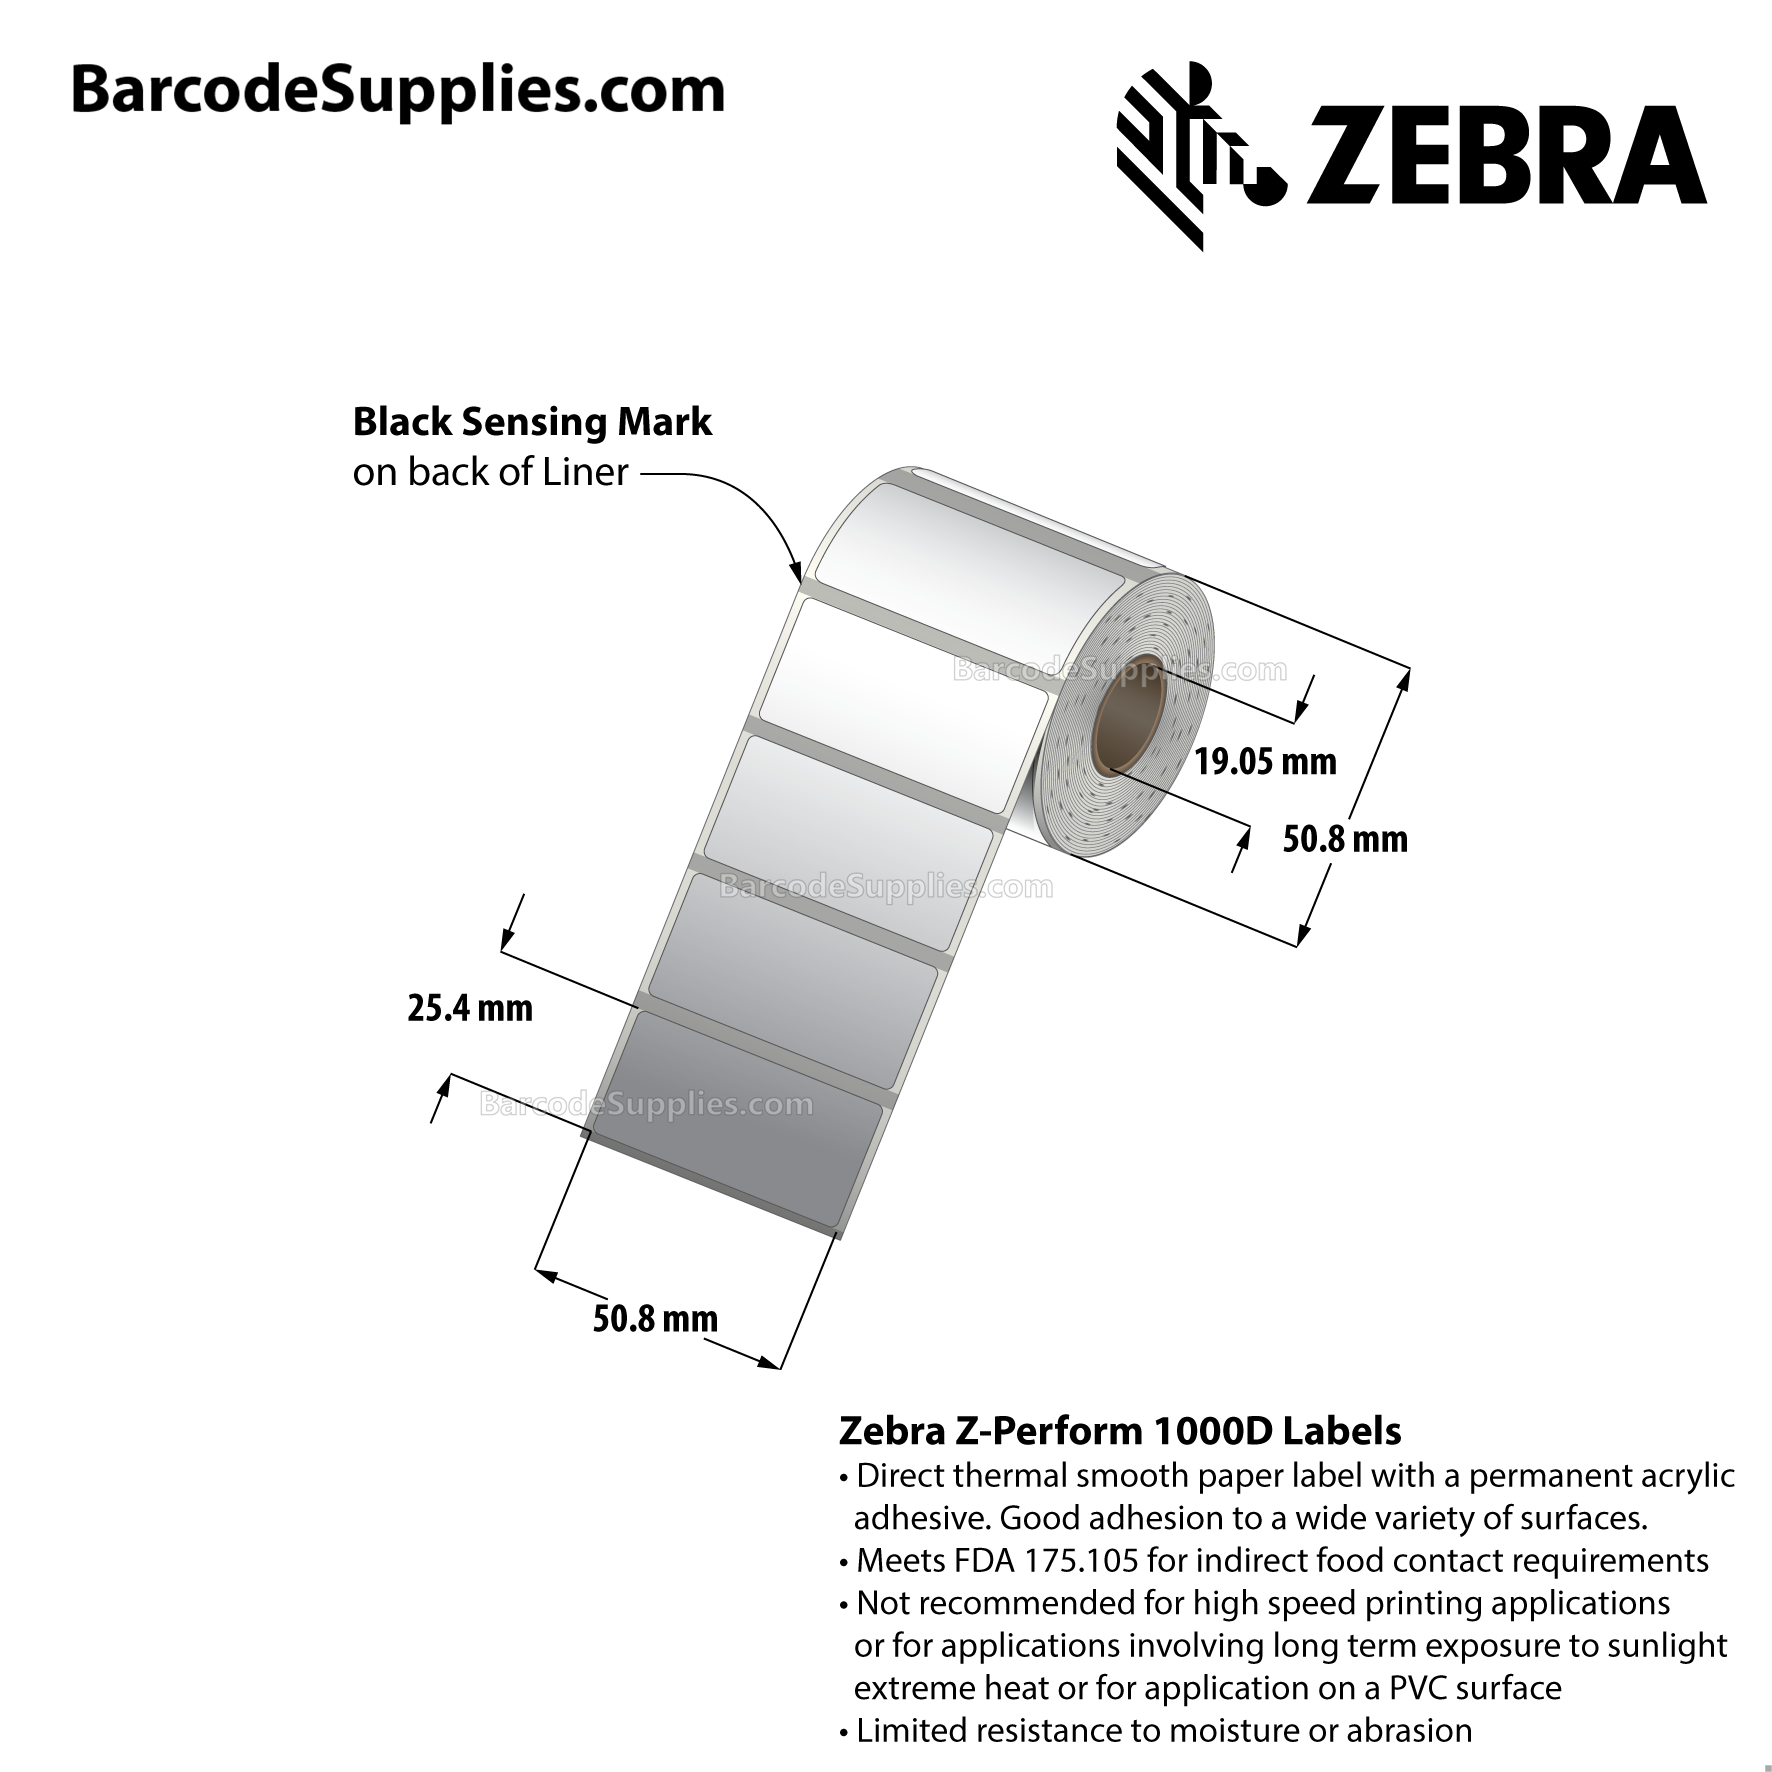 2 x 1 Direct Thermal White Z-Perform 1000D Labels With Permanent Adhesive - Black mark sensing - Not Perforated - 350 Labels Per Roll - Carton Of 36 Rolls - 12600 Labels Total - MPN: LD-R7MU5P